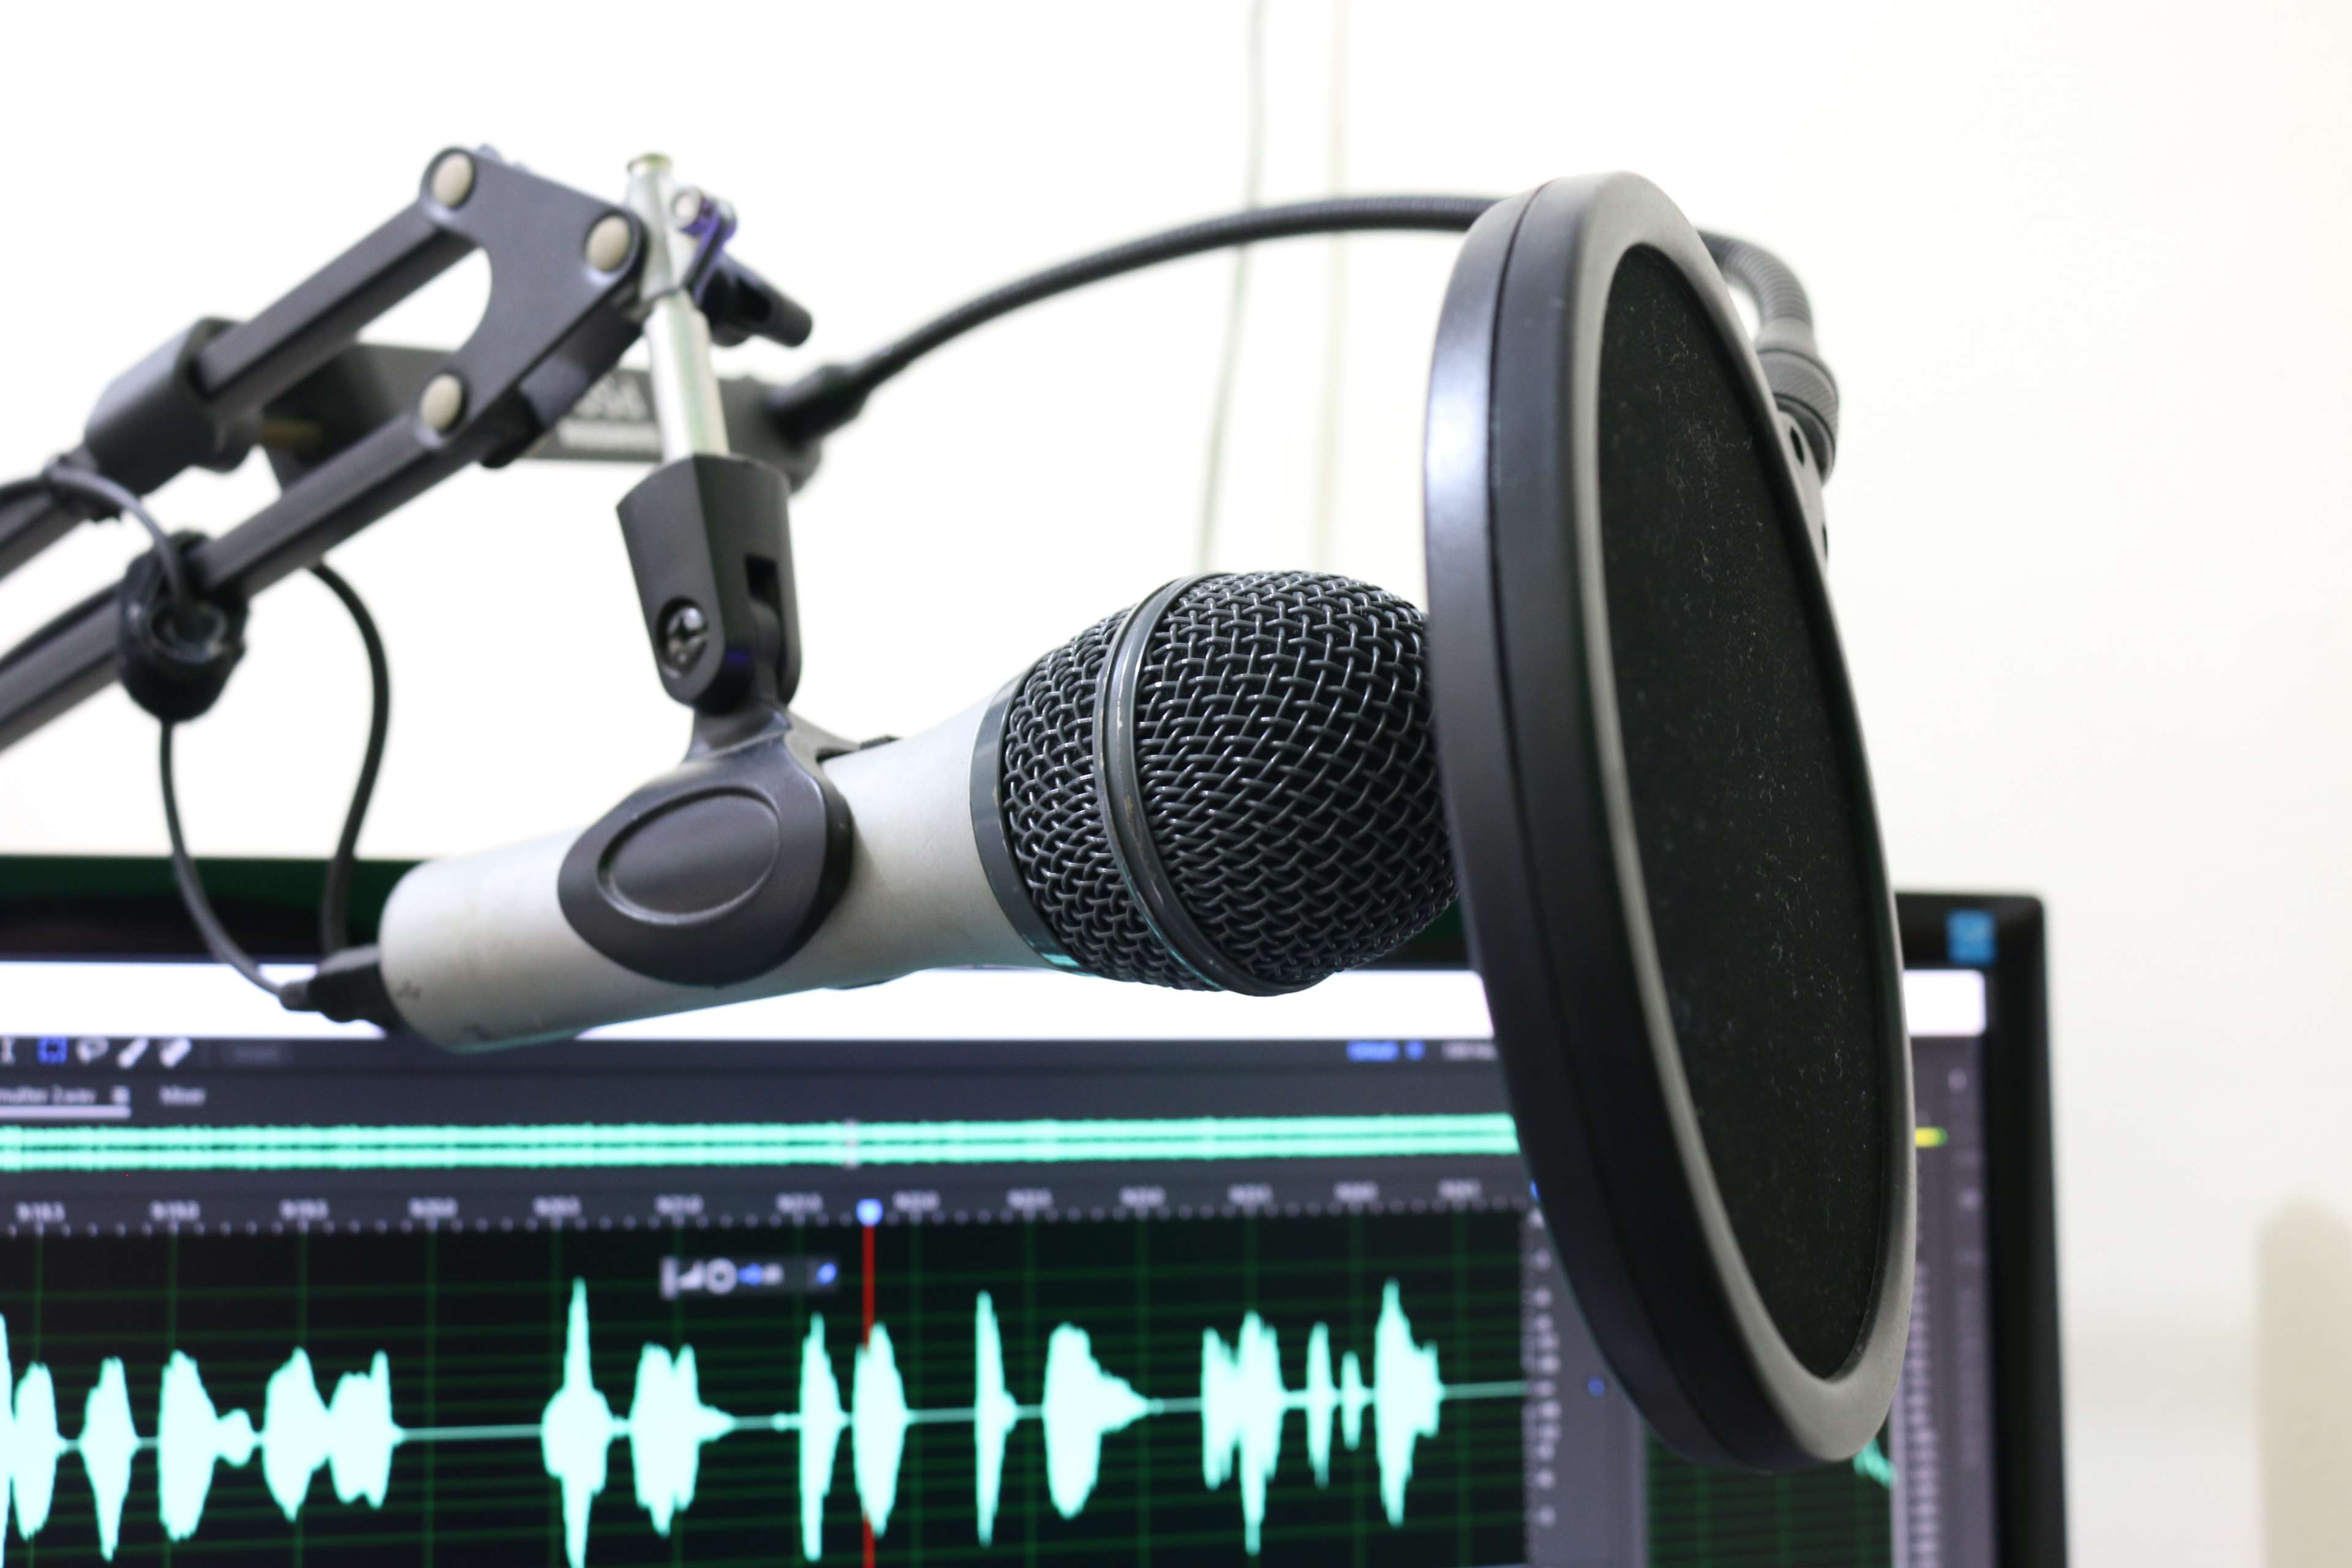 broadcast, microphone, music, podcast, pop filter, record, sound